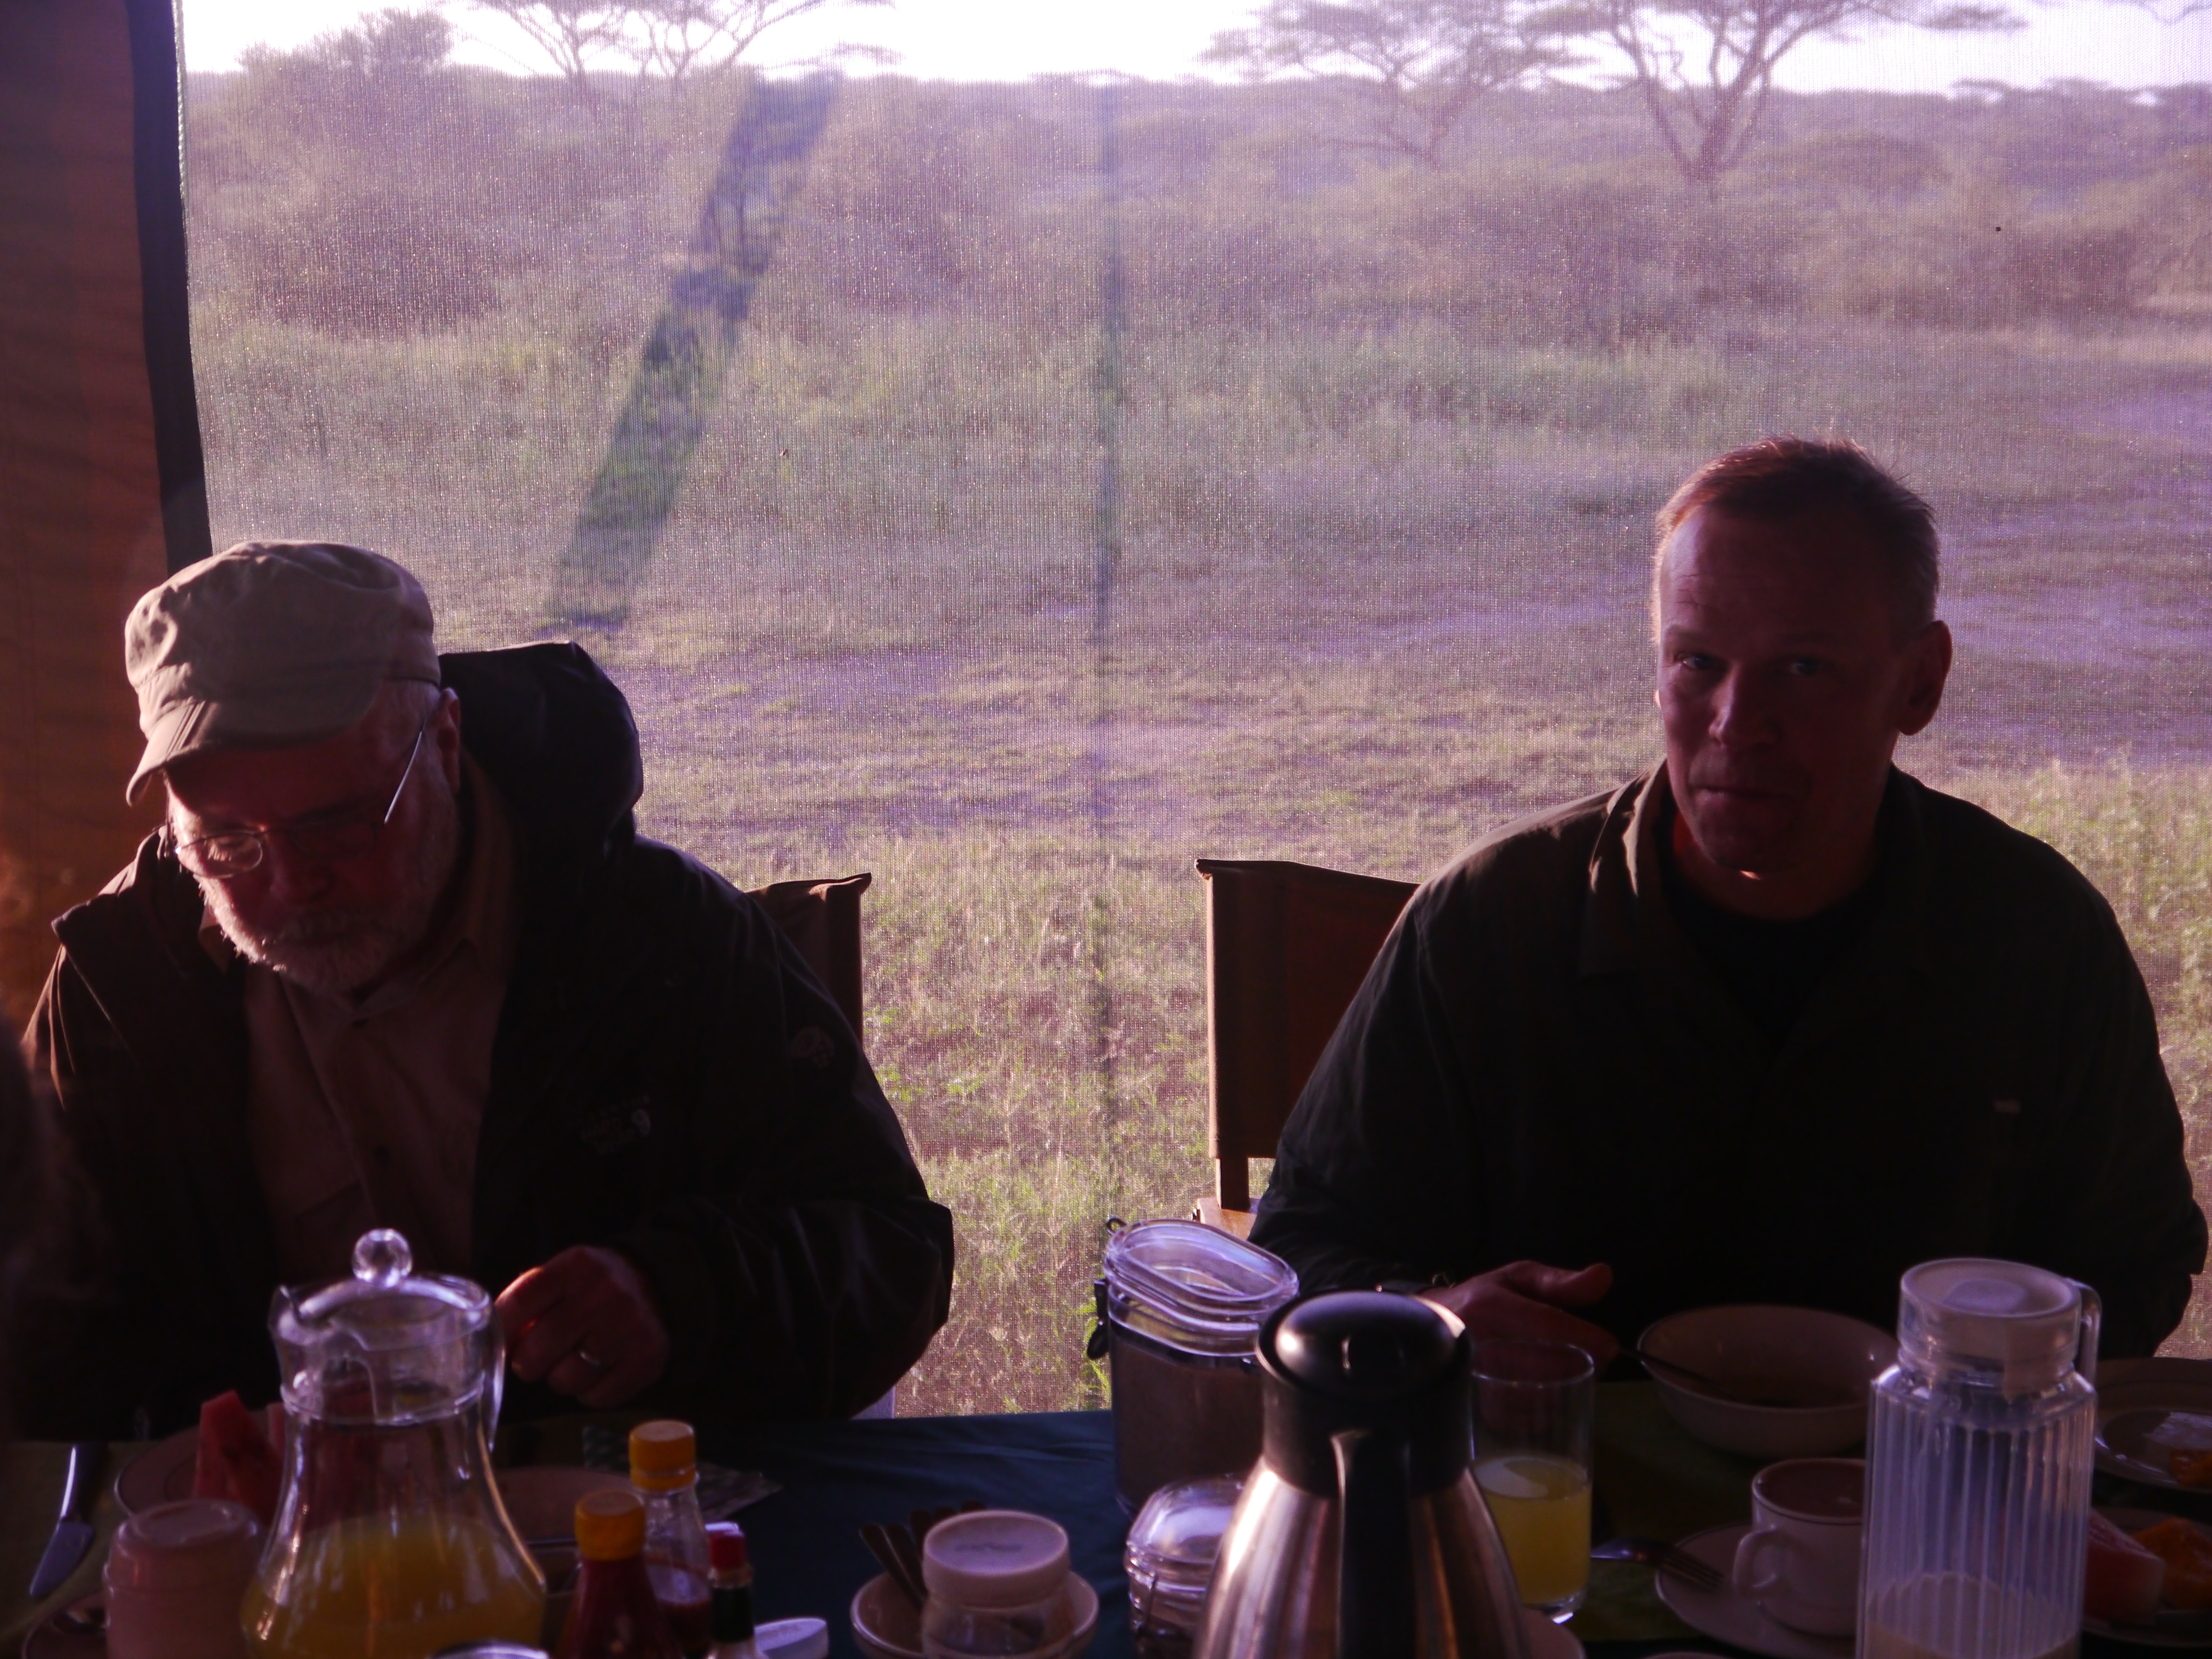 Peter Lancaster (left) and Paul Schuster traveled the world together and co-owned land to conserve for pygmy rabbits. Here, they’re on a safari in Tanzania. Courtesy of Peter Lancaster 